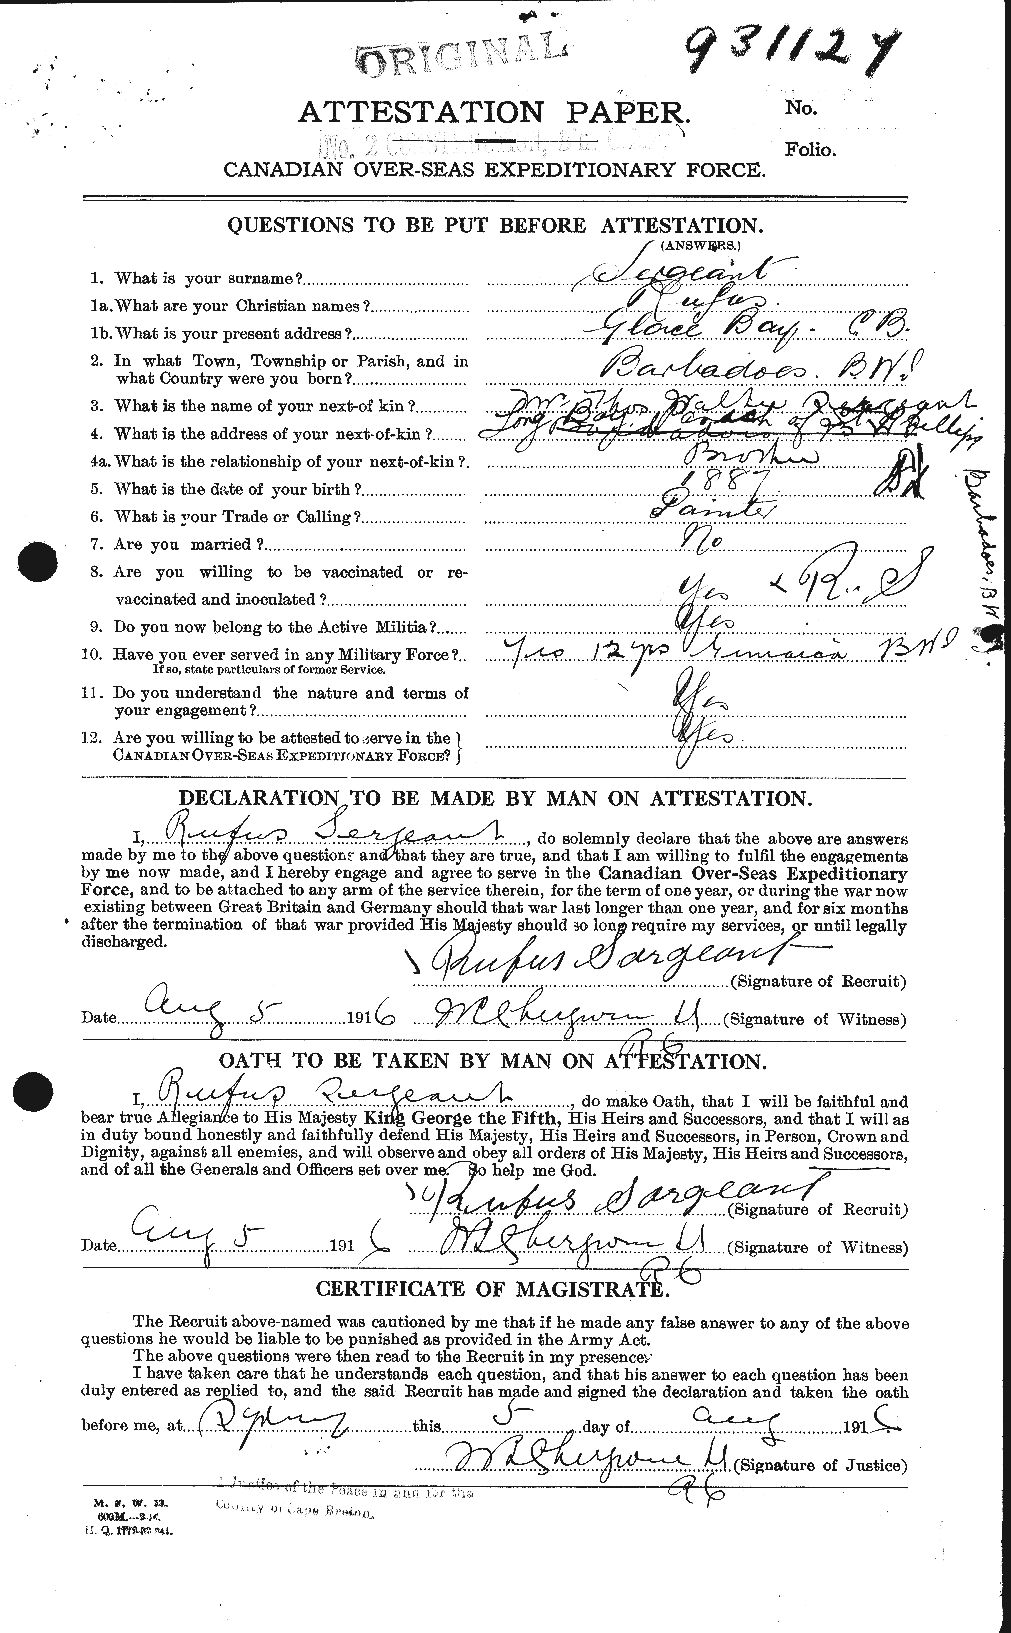 Personnel Records of the First World War - CEF 079463a